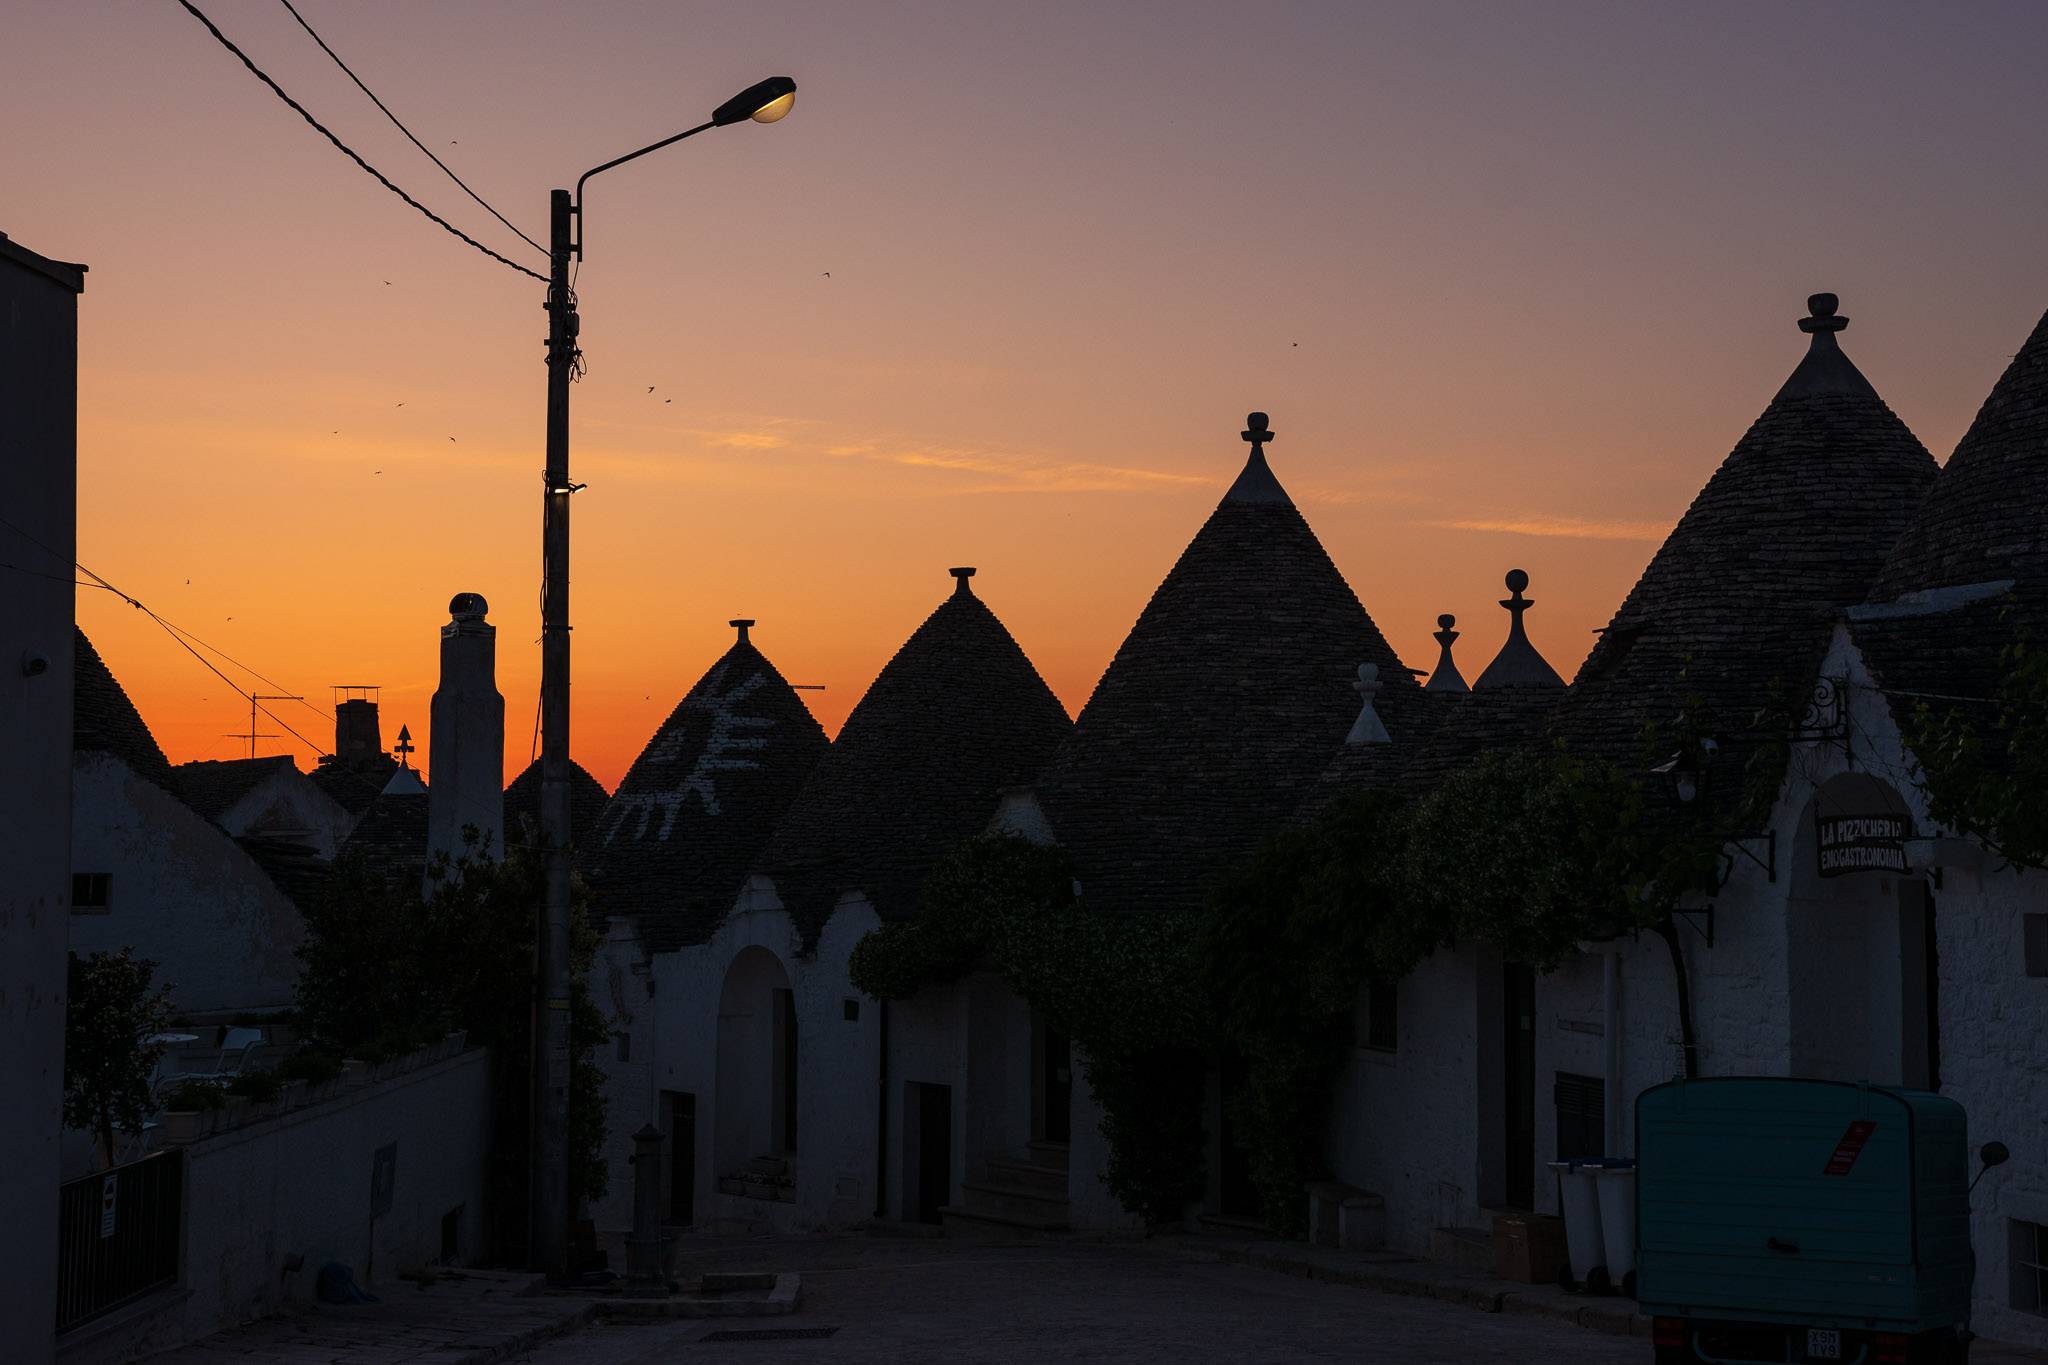 The Best Things to Do in Alberobello, Puglia, Italy: Home of the Trulli